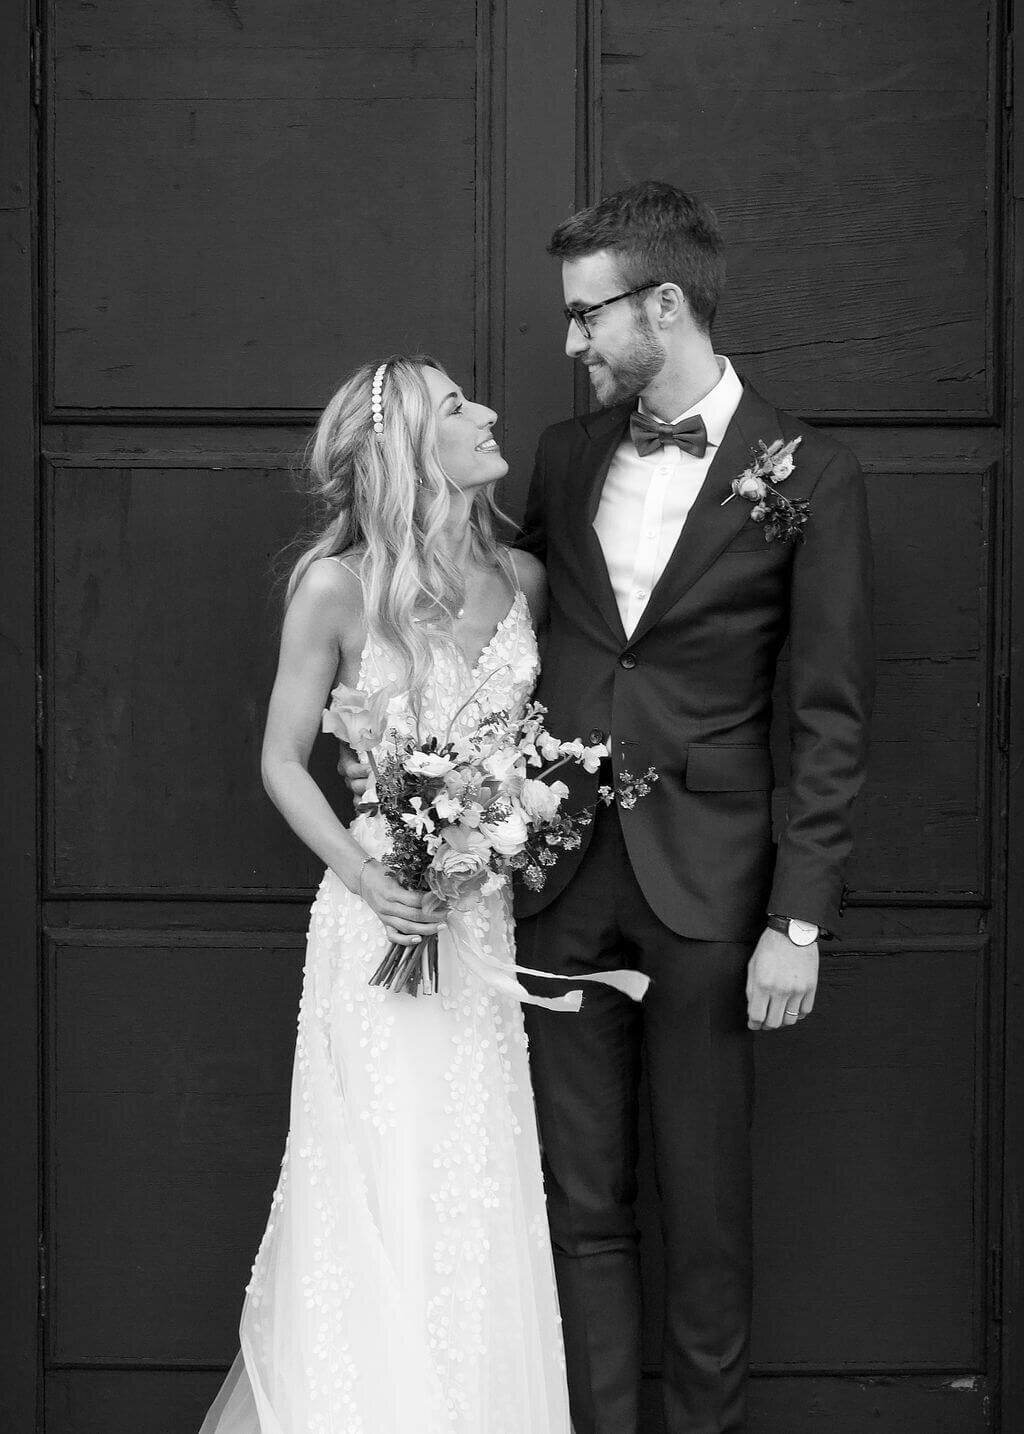 Bride and Groom looking at each other in black and white